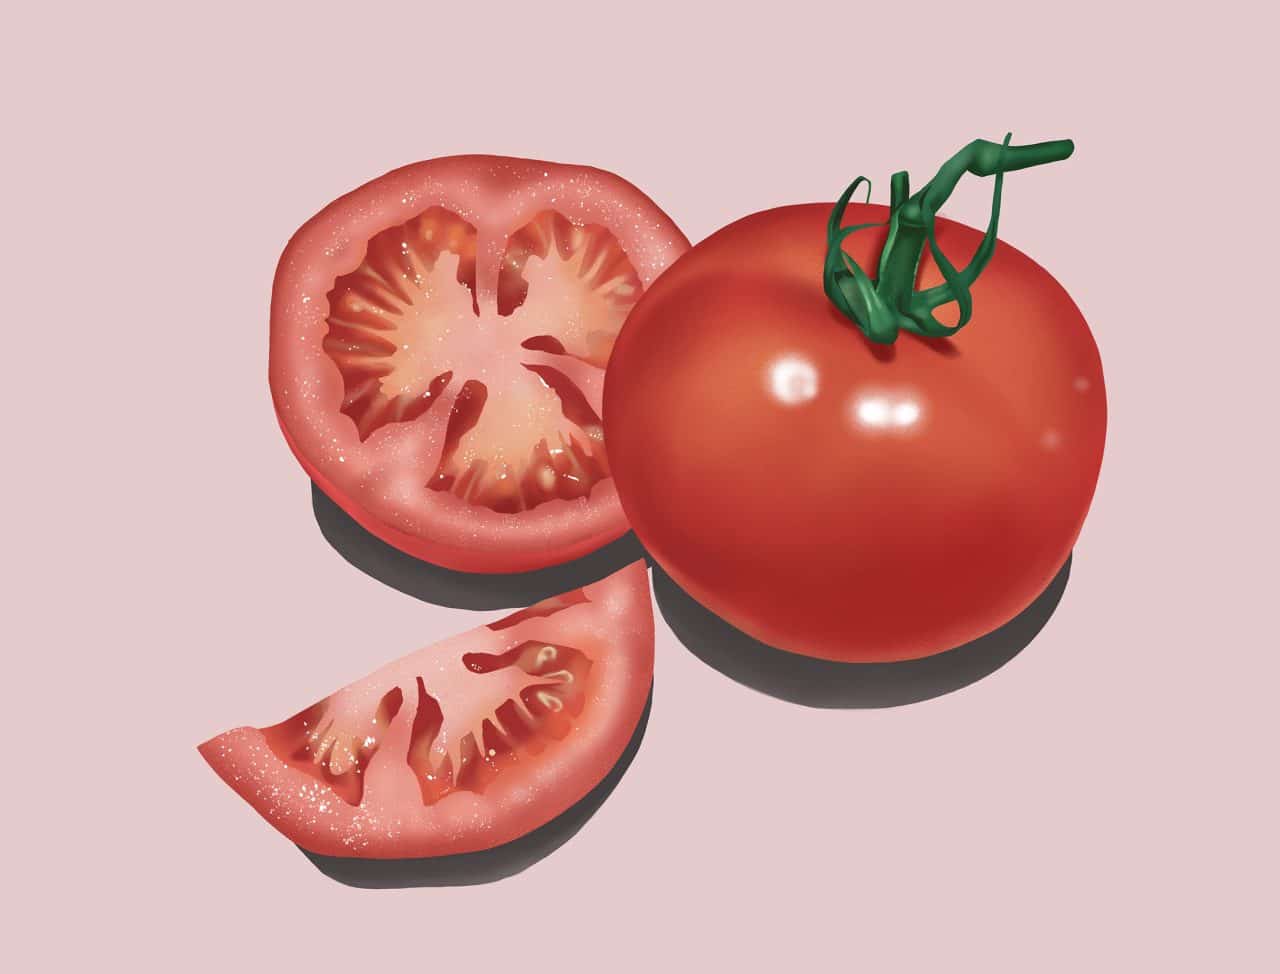 Toronto illustrator Mark Scheibmayr shares tips on how to draw tomatoes.